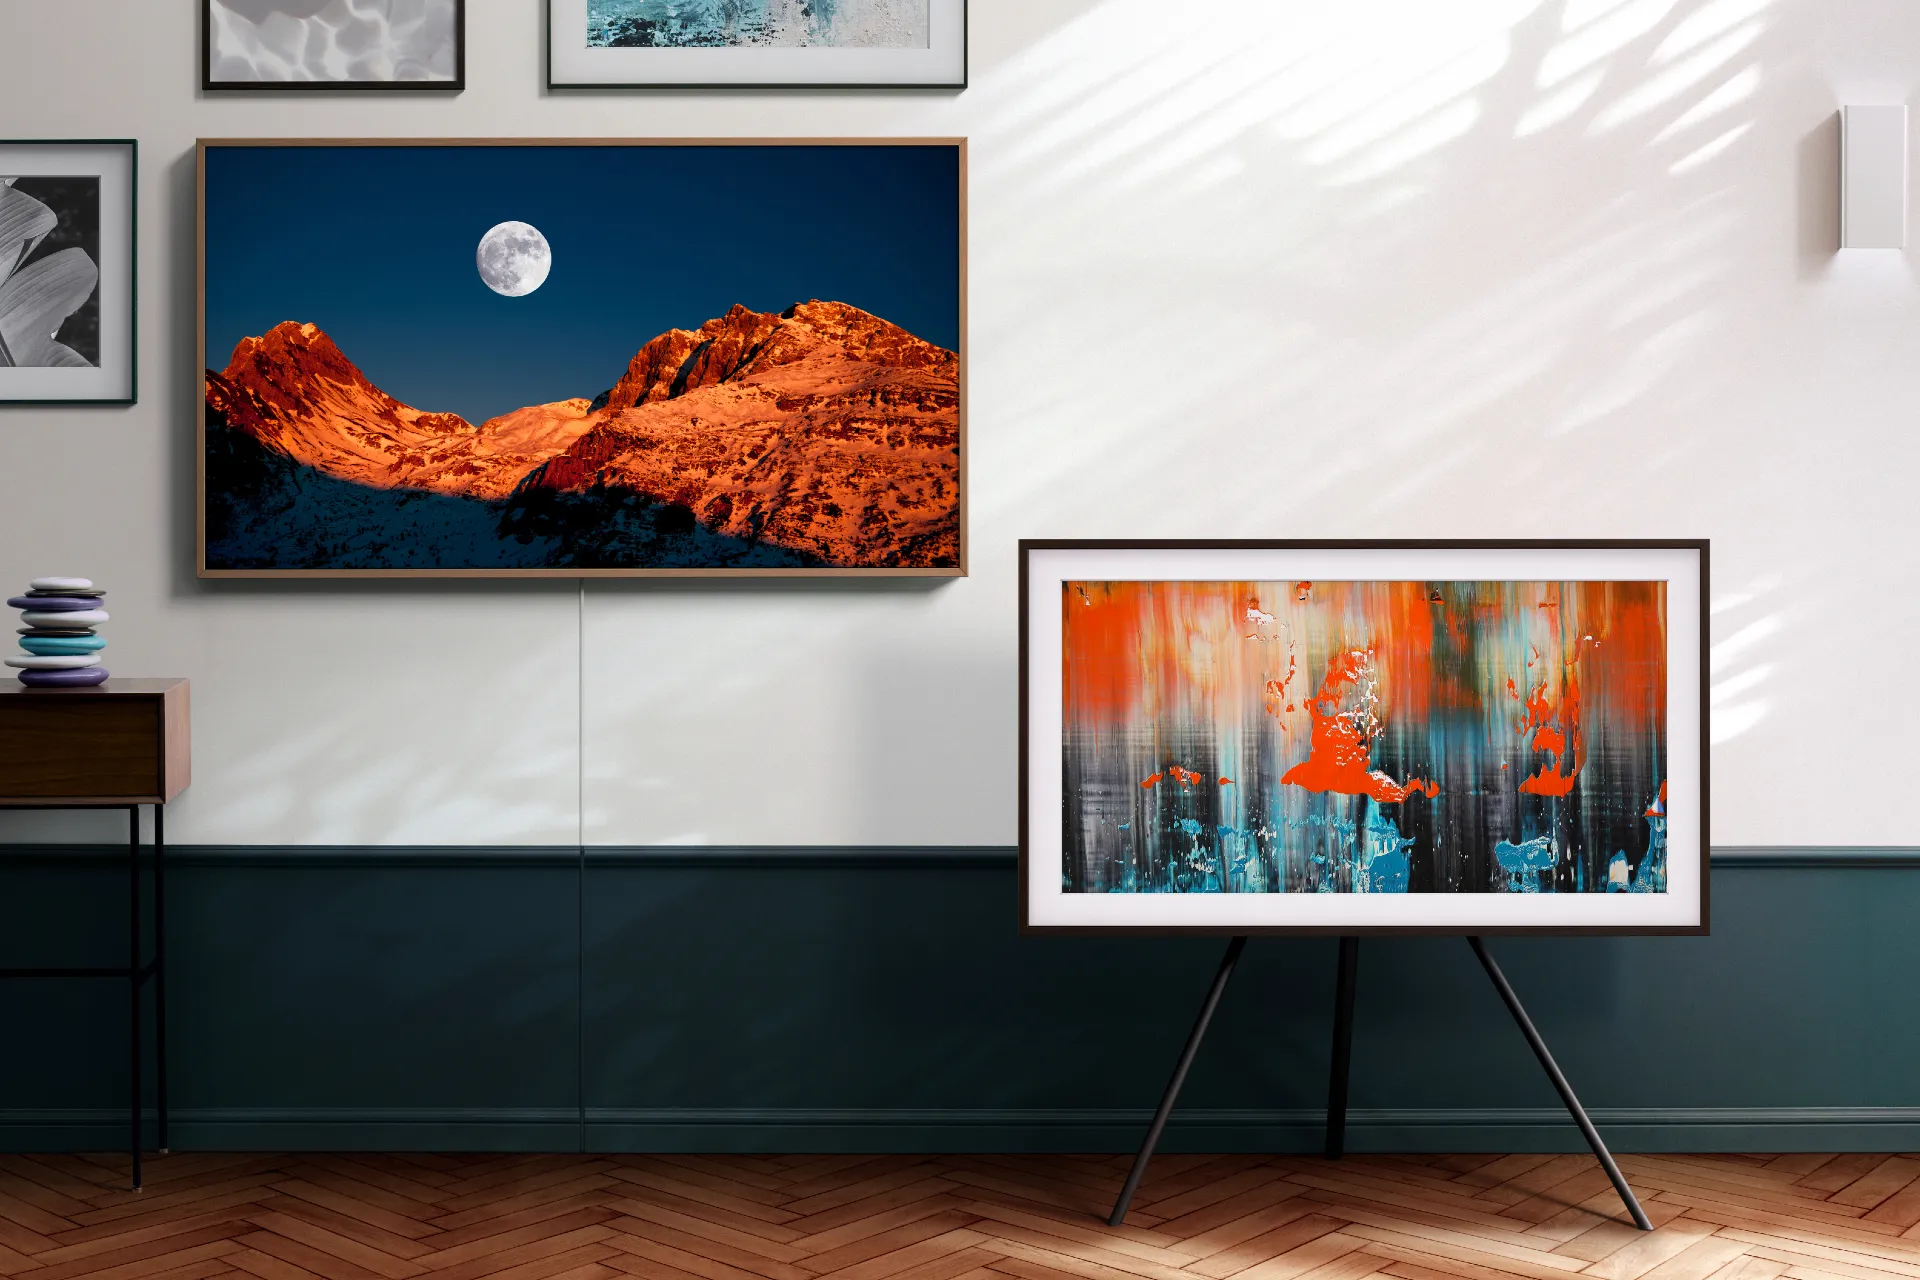 Finally, A Television That Combines Art & Entertainment Perfectly